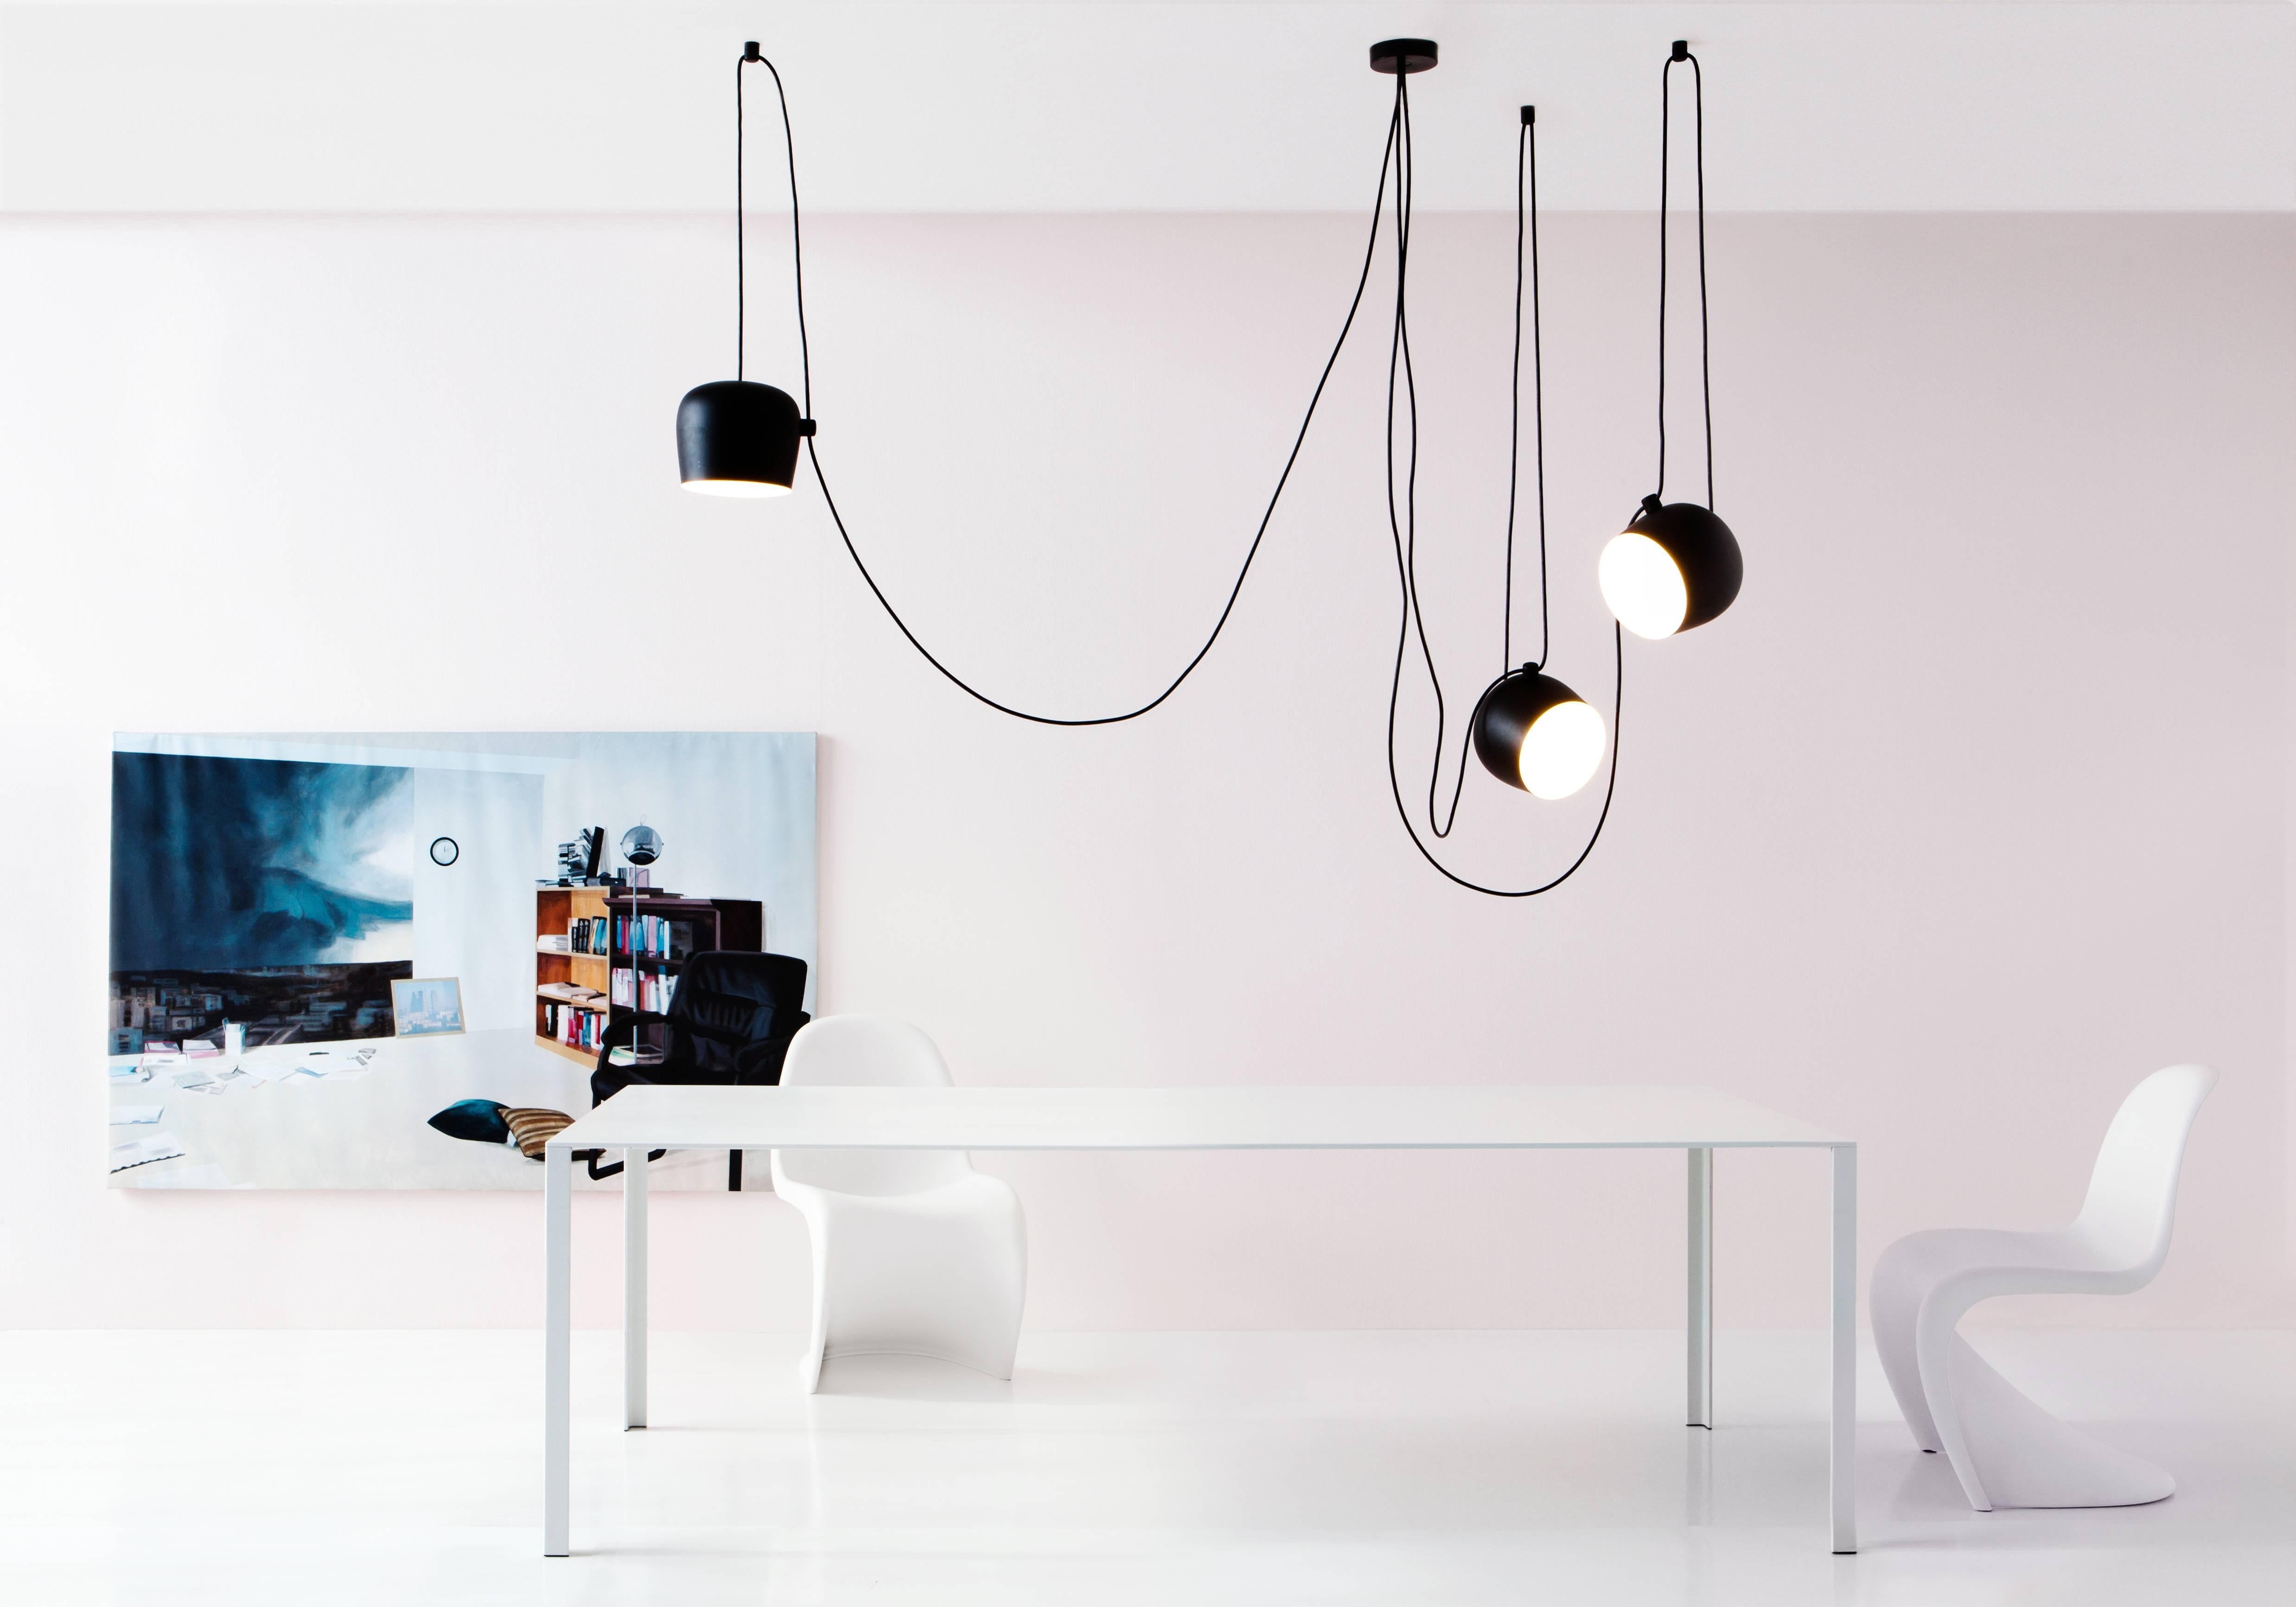 FLOS Aim Bronze Three-Lamp Light Set w/ Canopy by Ronan & Erwan Bouroullec

Created by the Bouroullec brothers in 2010, the AIM ceiling light is a design stripped to its most basic—and beautiful—essence. This innovative form of modern pendant